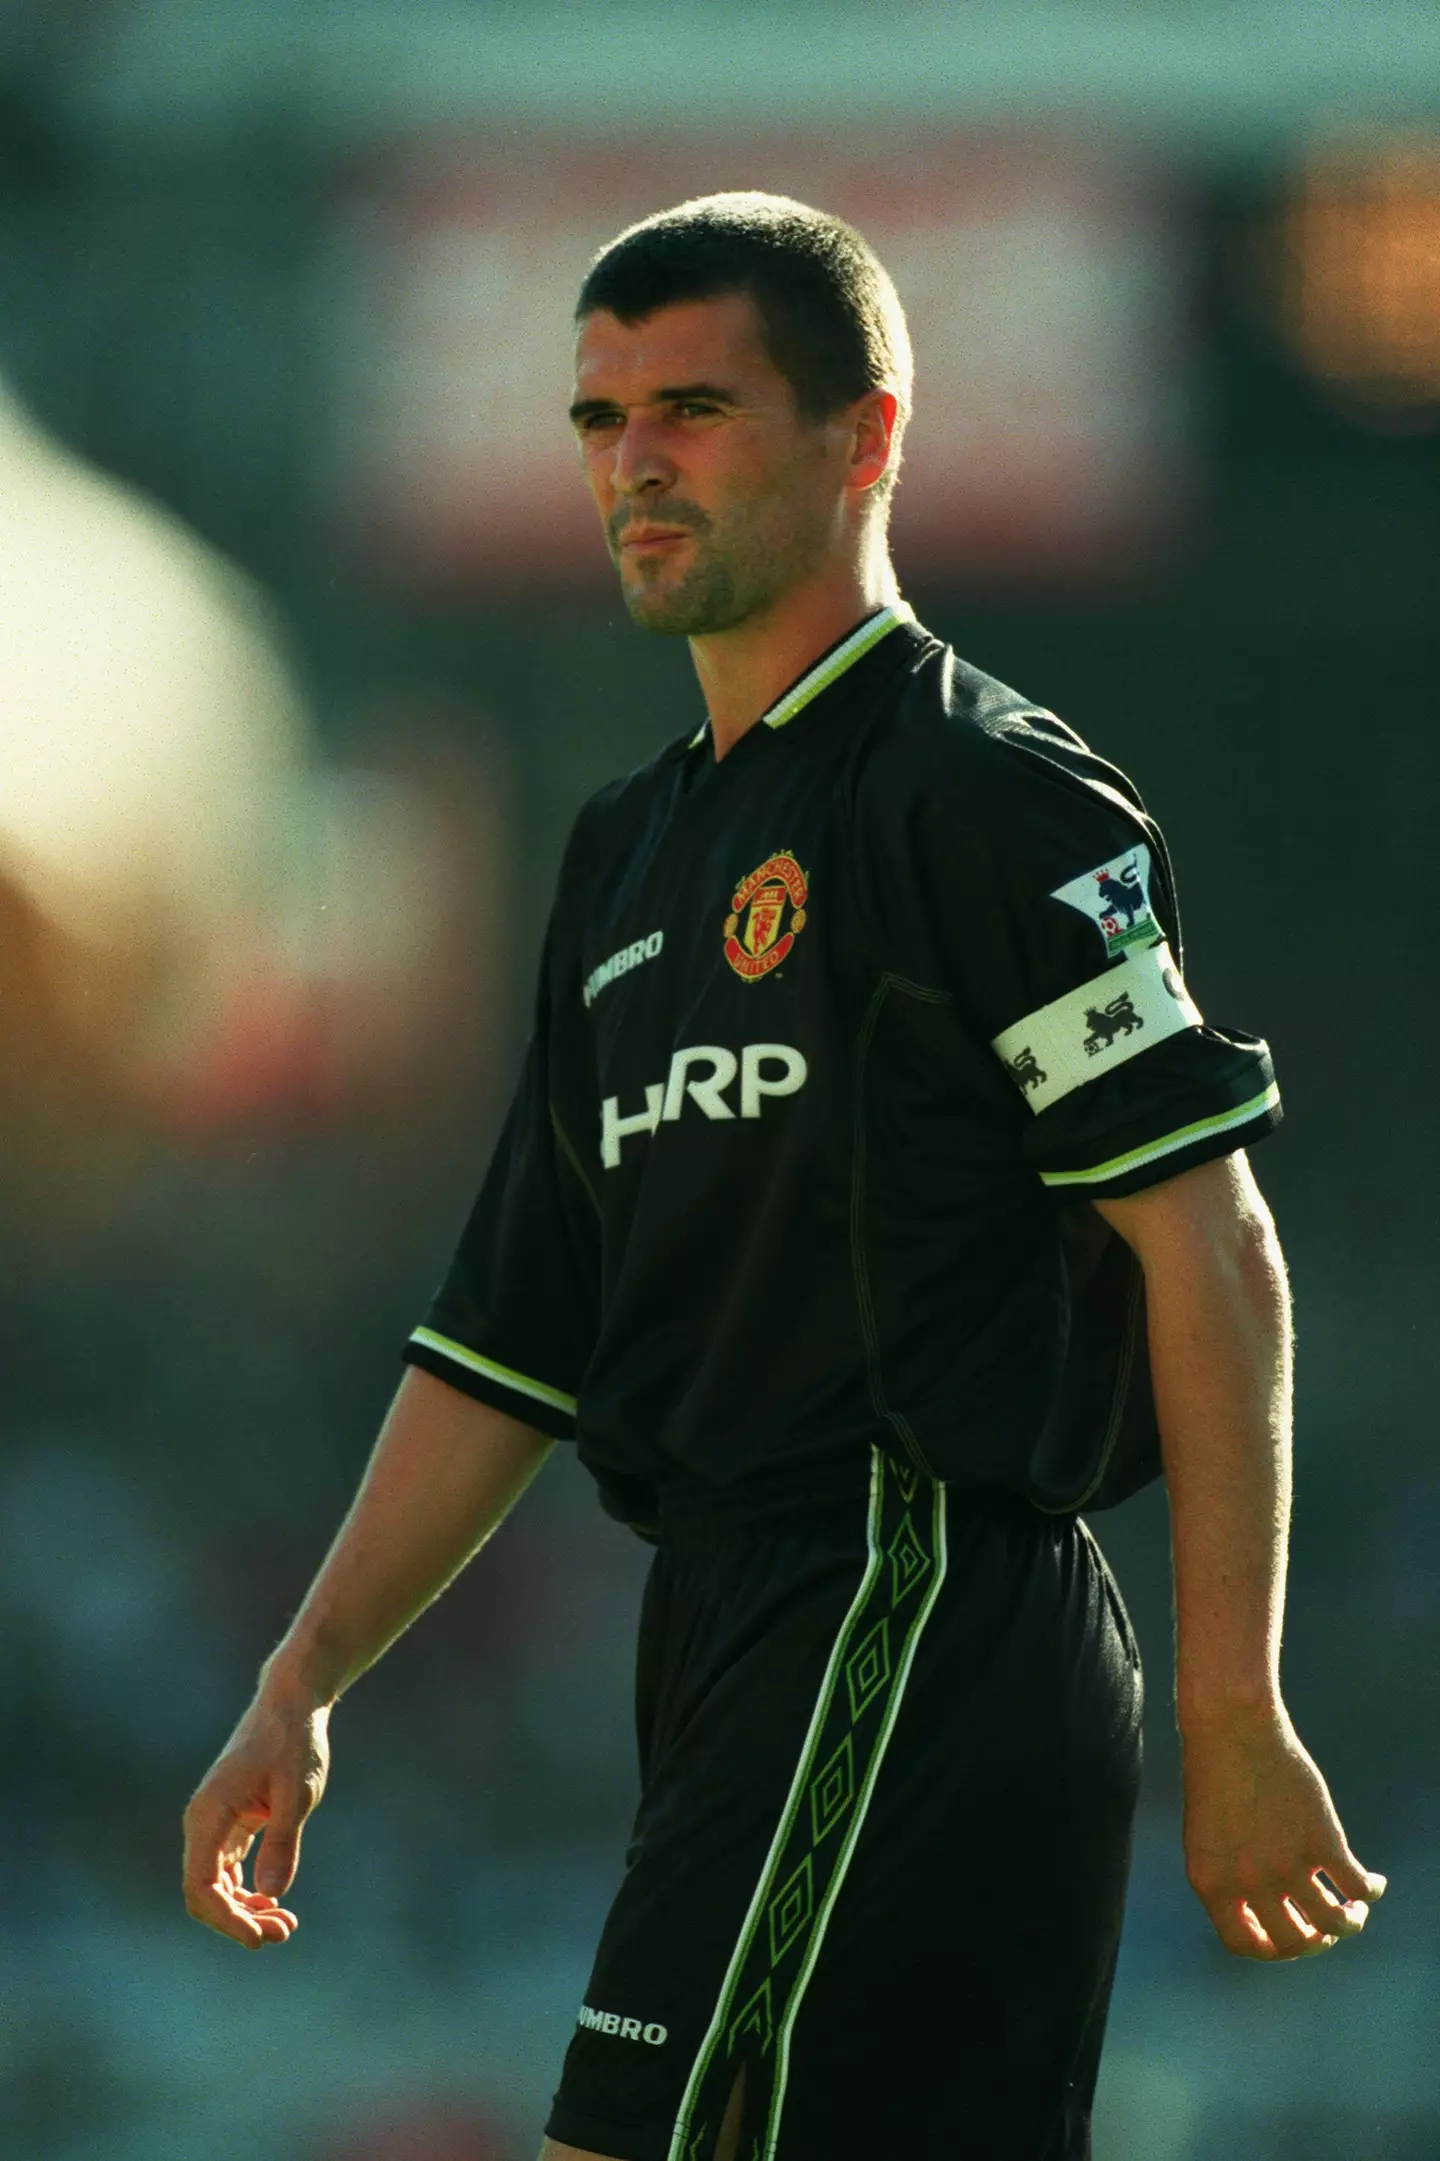 Former Manchester United captain Roy Keane in the 1998/99 third kit. (Alamy)